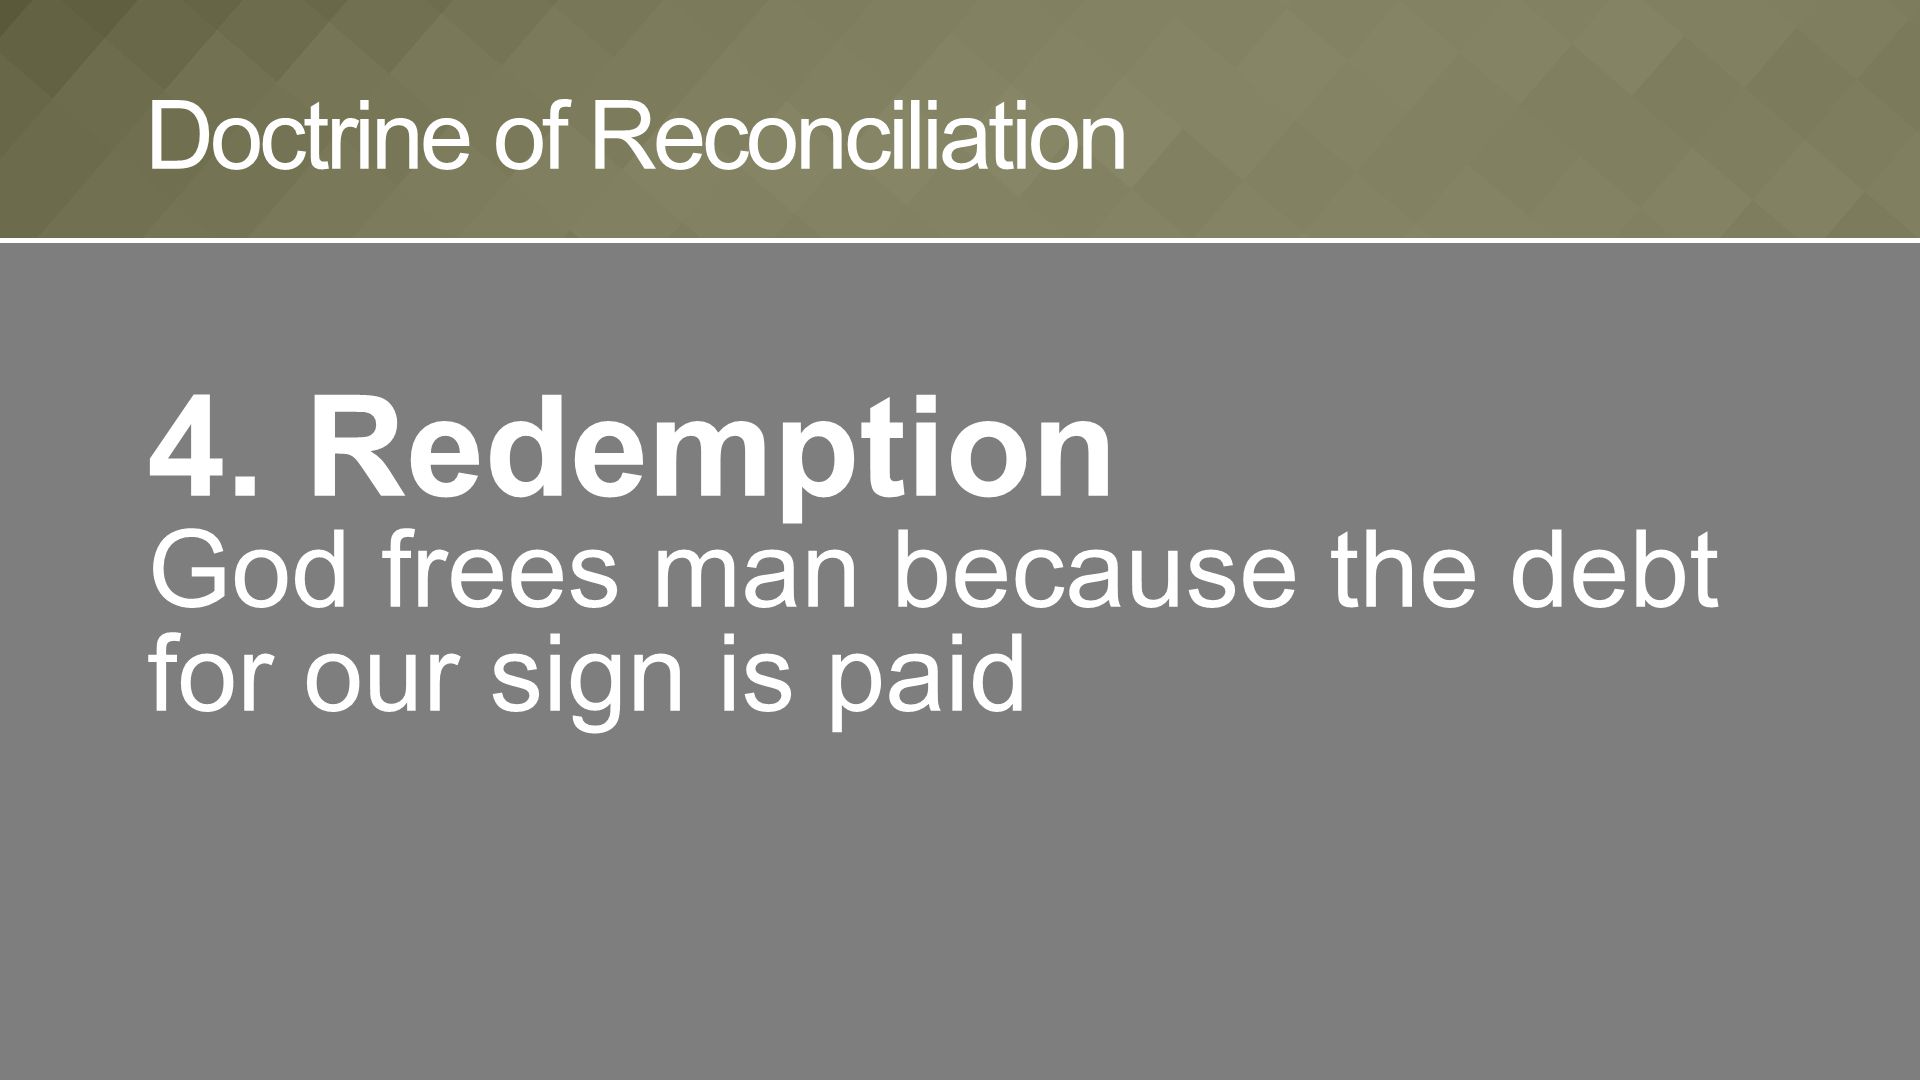 4. Redemption God frees man because the debt for our sign is paid Doctrine of Reconciliation